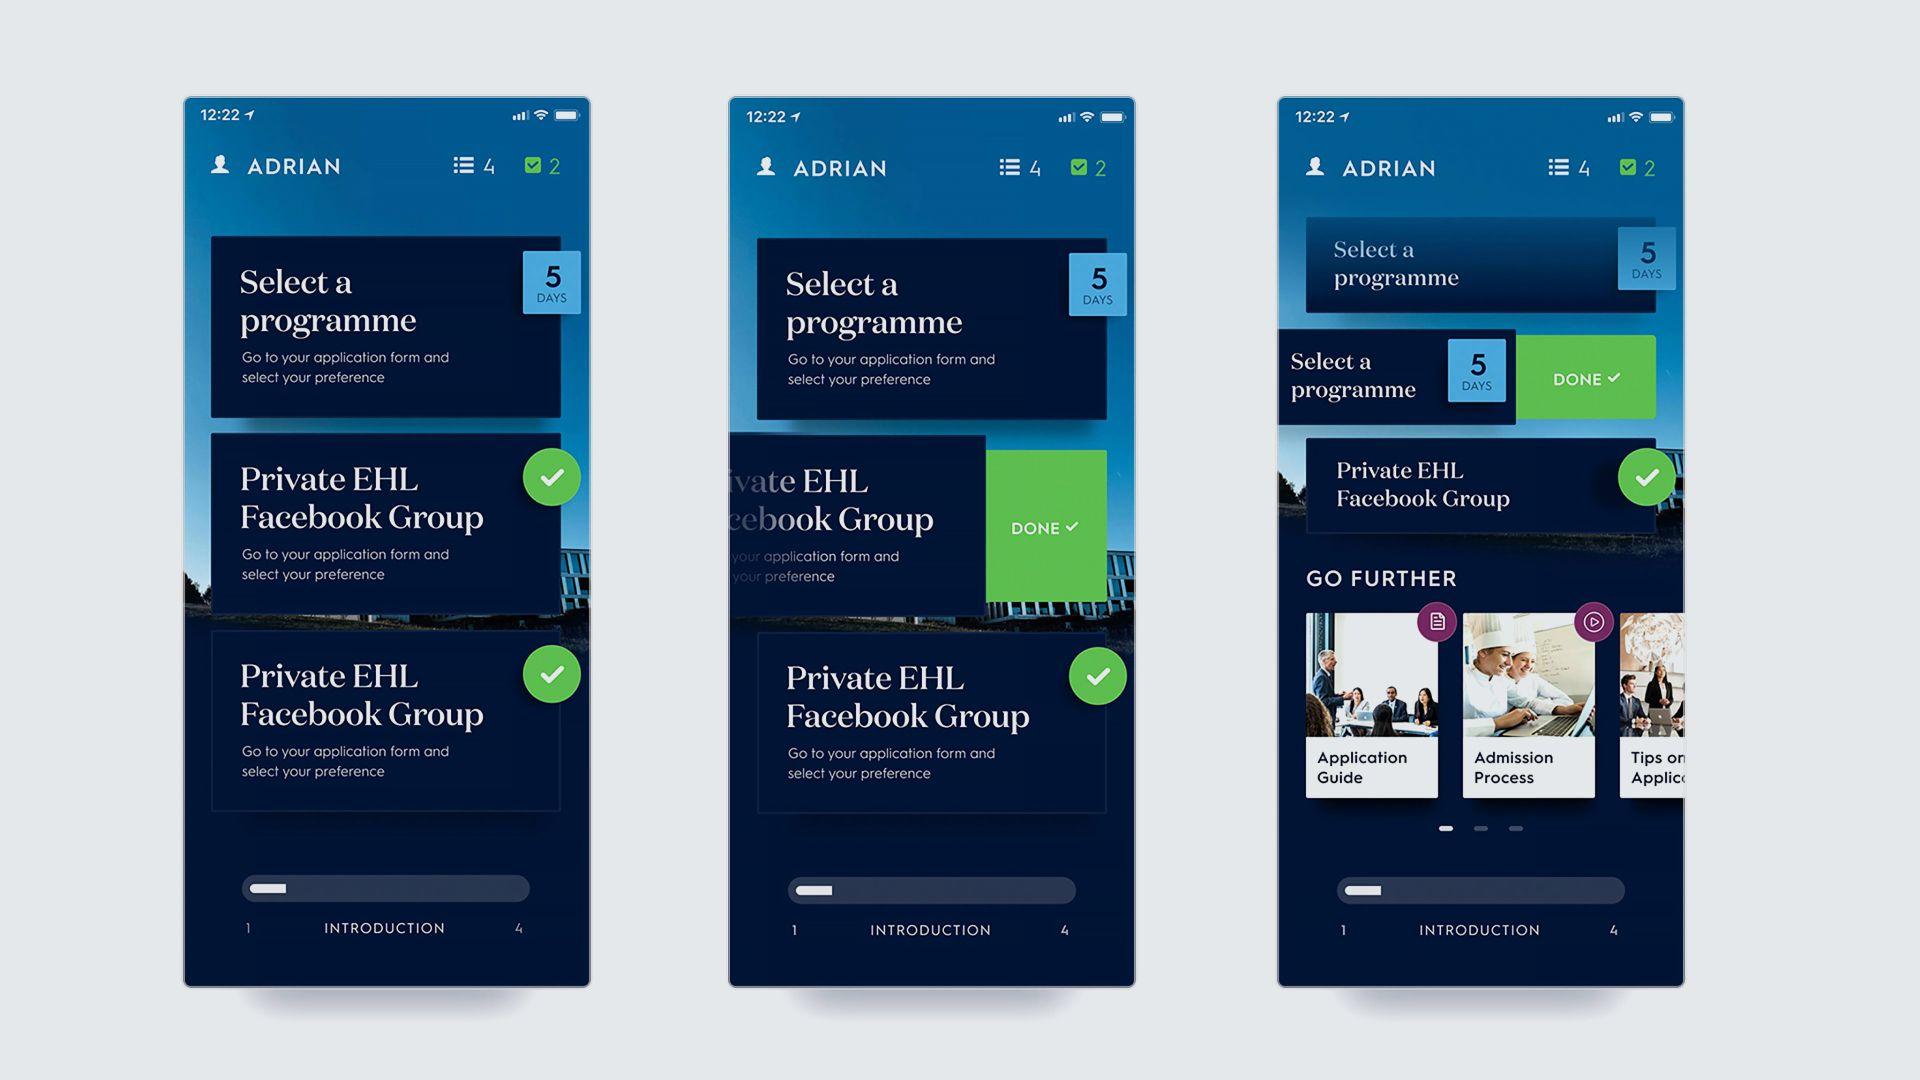 Multiple view of interaction inside the app